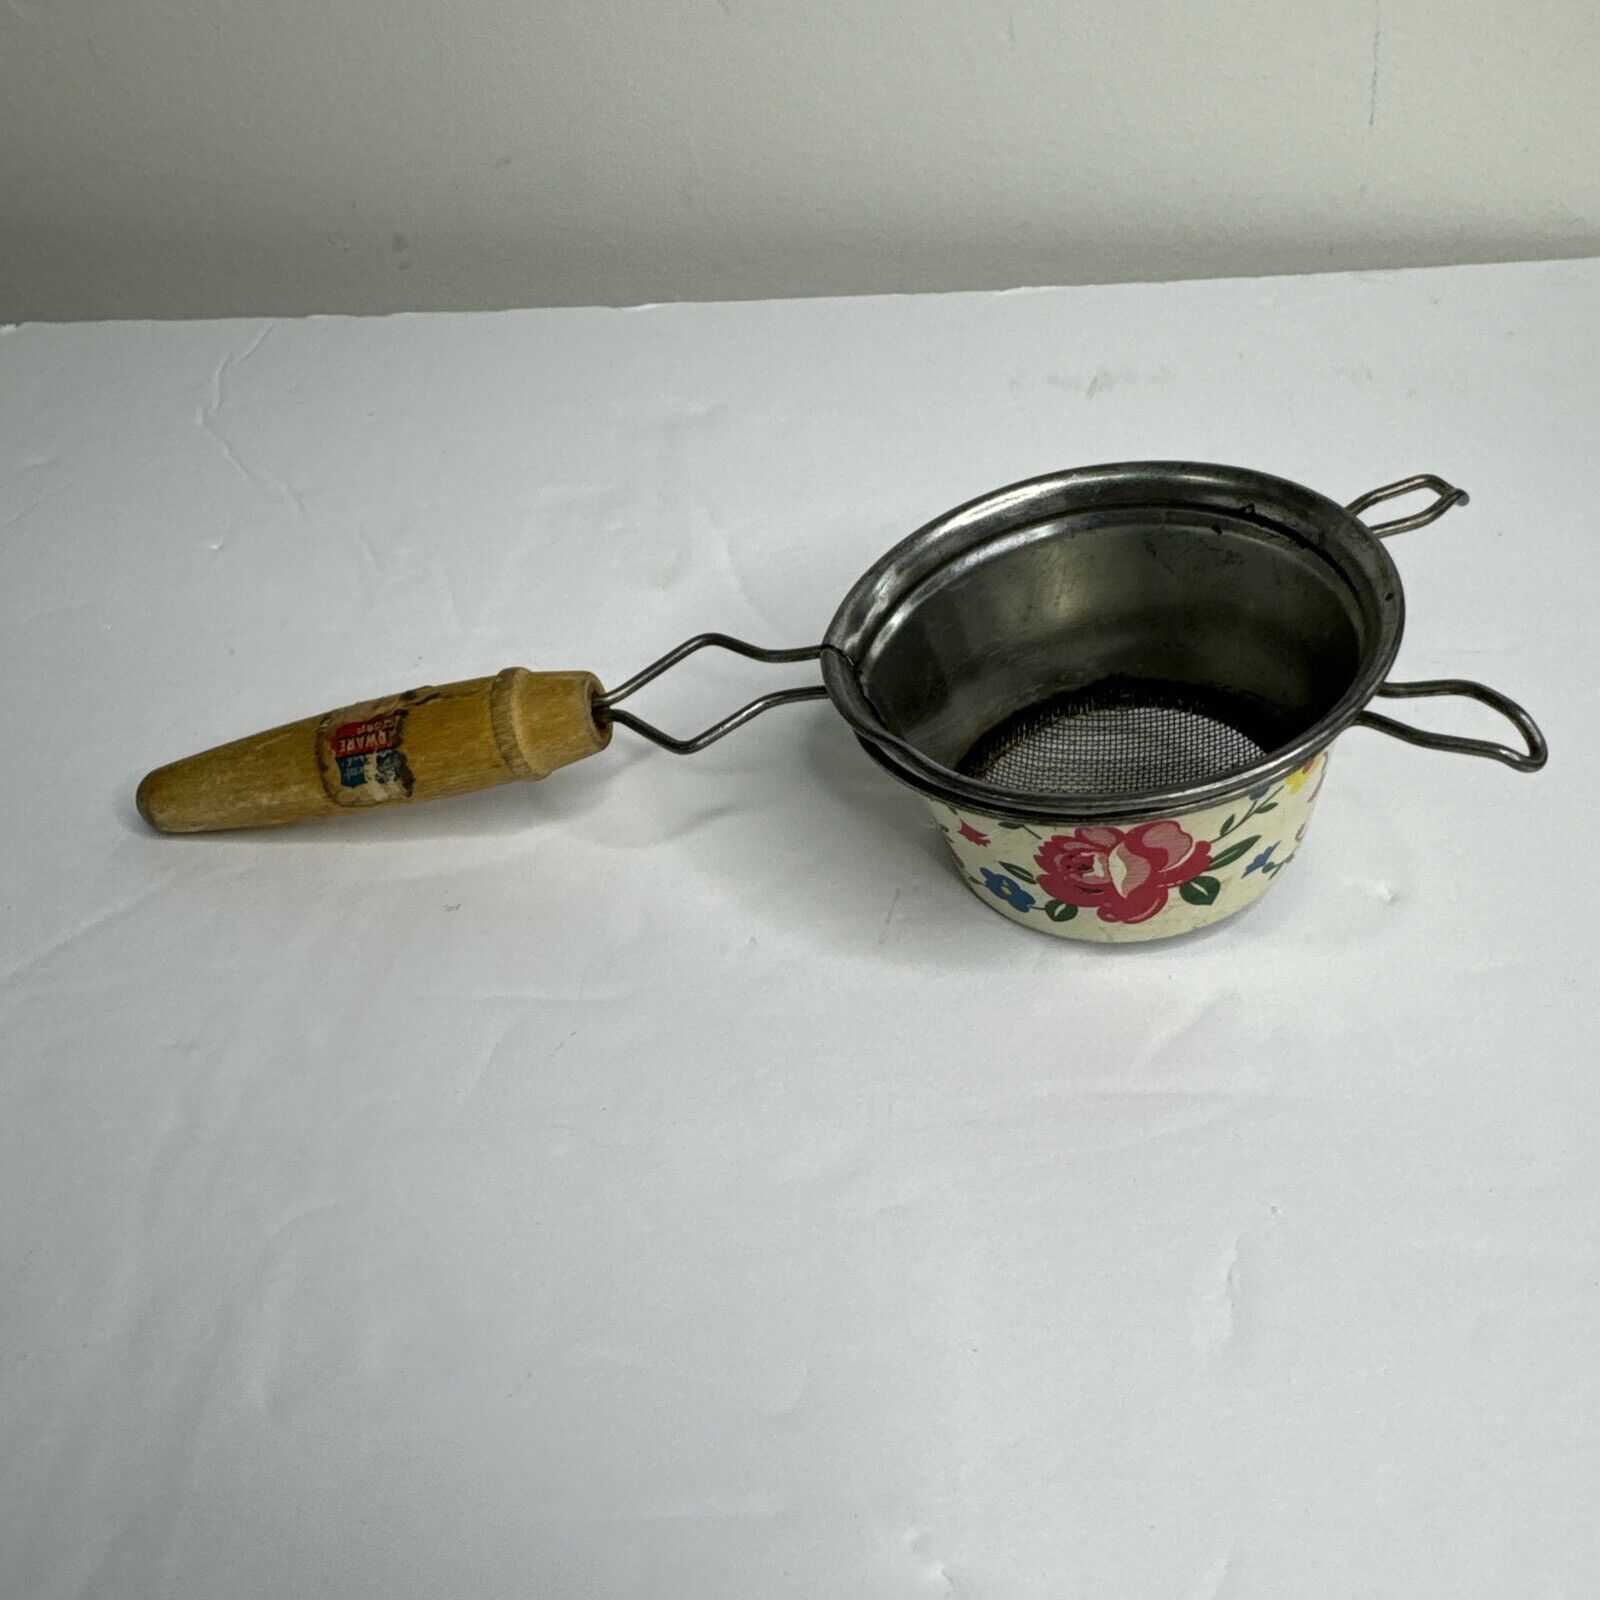 VTG 1950s Miracle Gem Small Metal Sifter Strainer Wooden Handle Floral Farmhouse